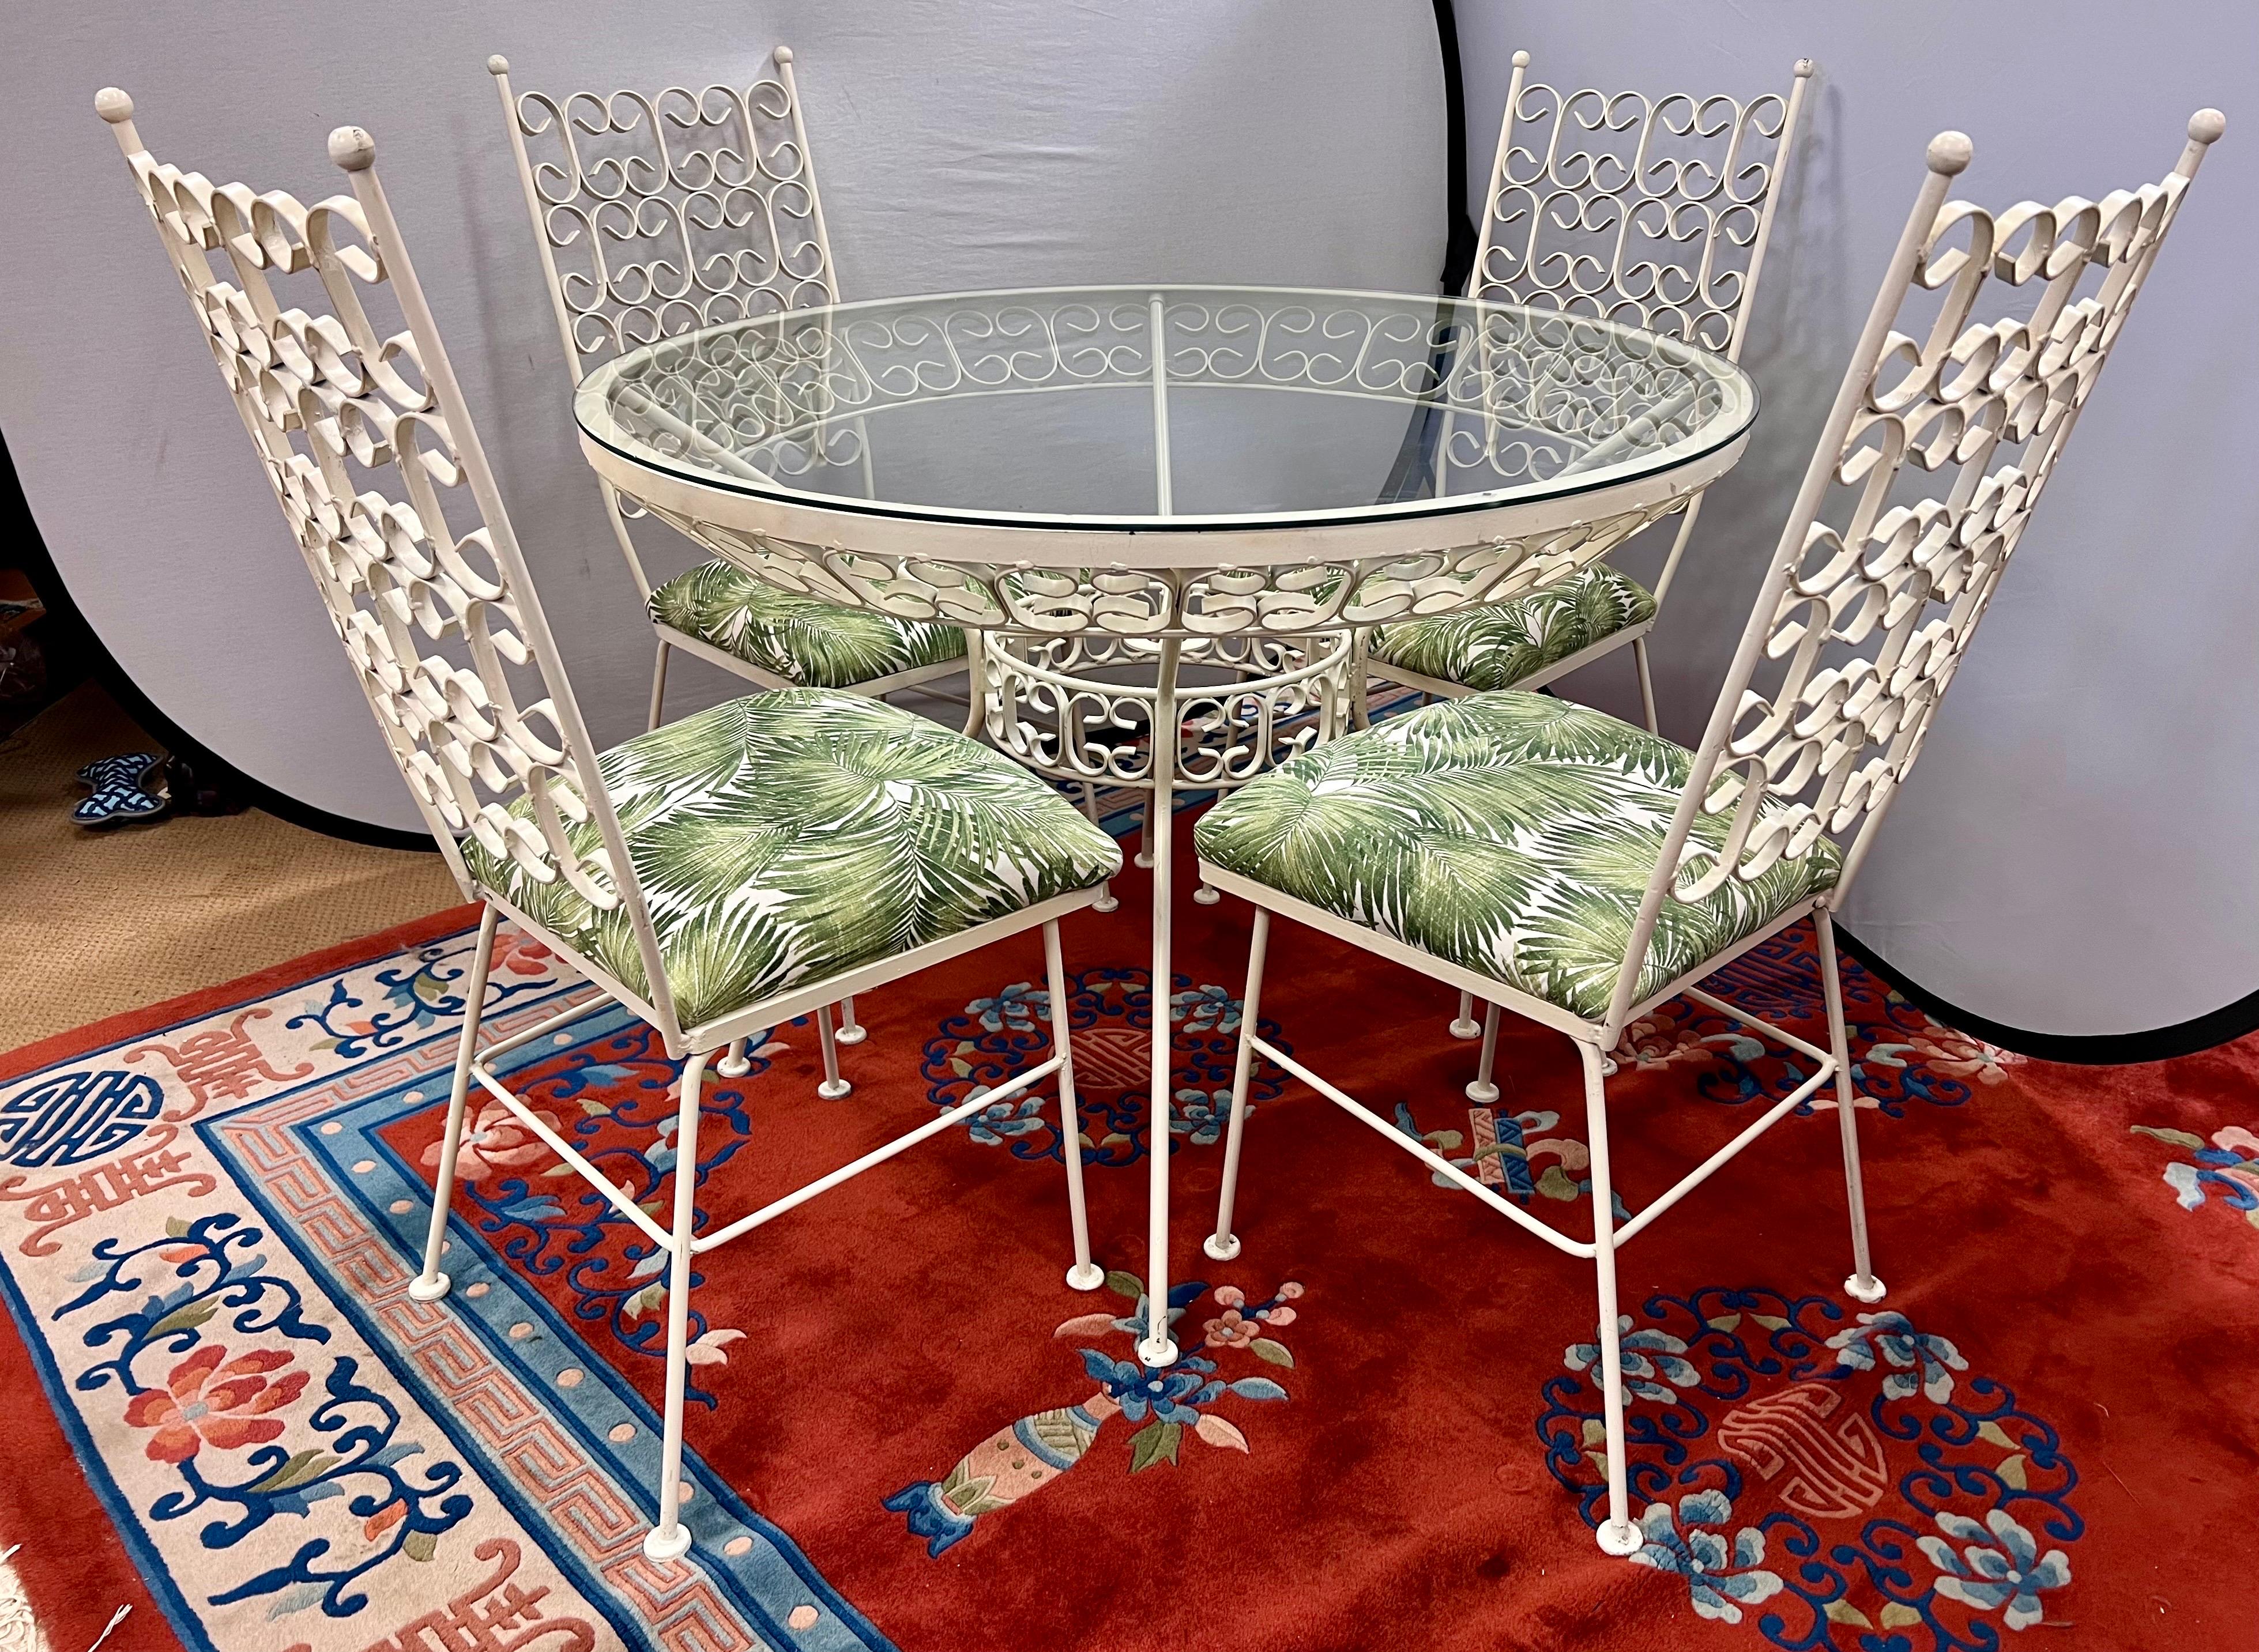 Vintage Arthur Umanoff Grenada dining set - this set has been powder coated white and the seat cushions have been completely reupholstered with a tropical print fabric. Very Palm Beach regency.
Fabulous 5-piece dining set includes 4 high back chairs